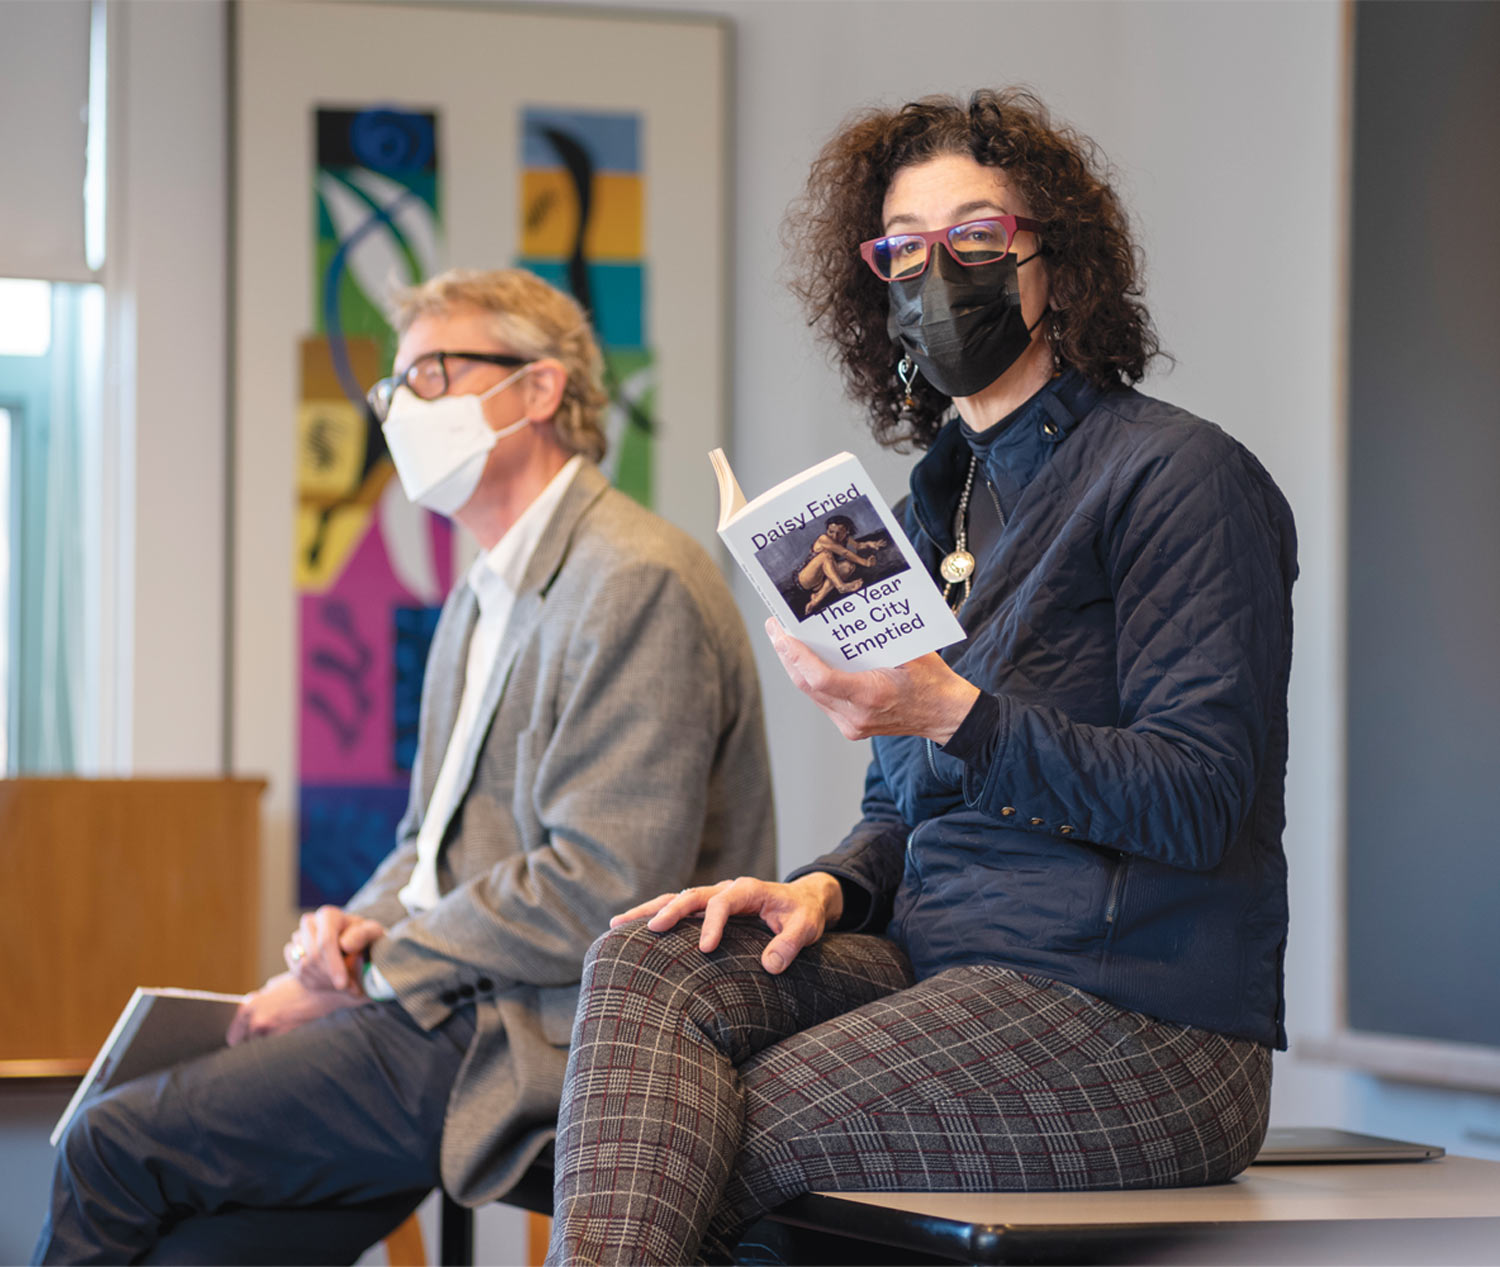 Two adults sit on a desk wearing masks. The woman with glasses reads from a book.